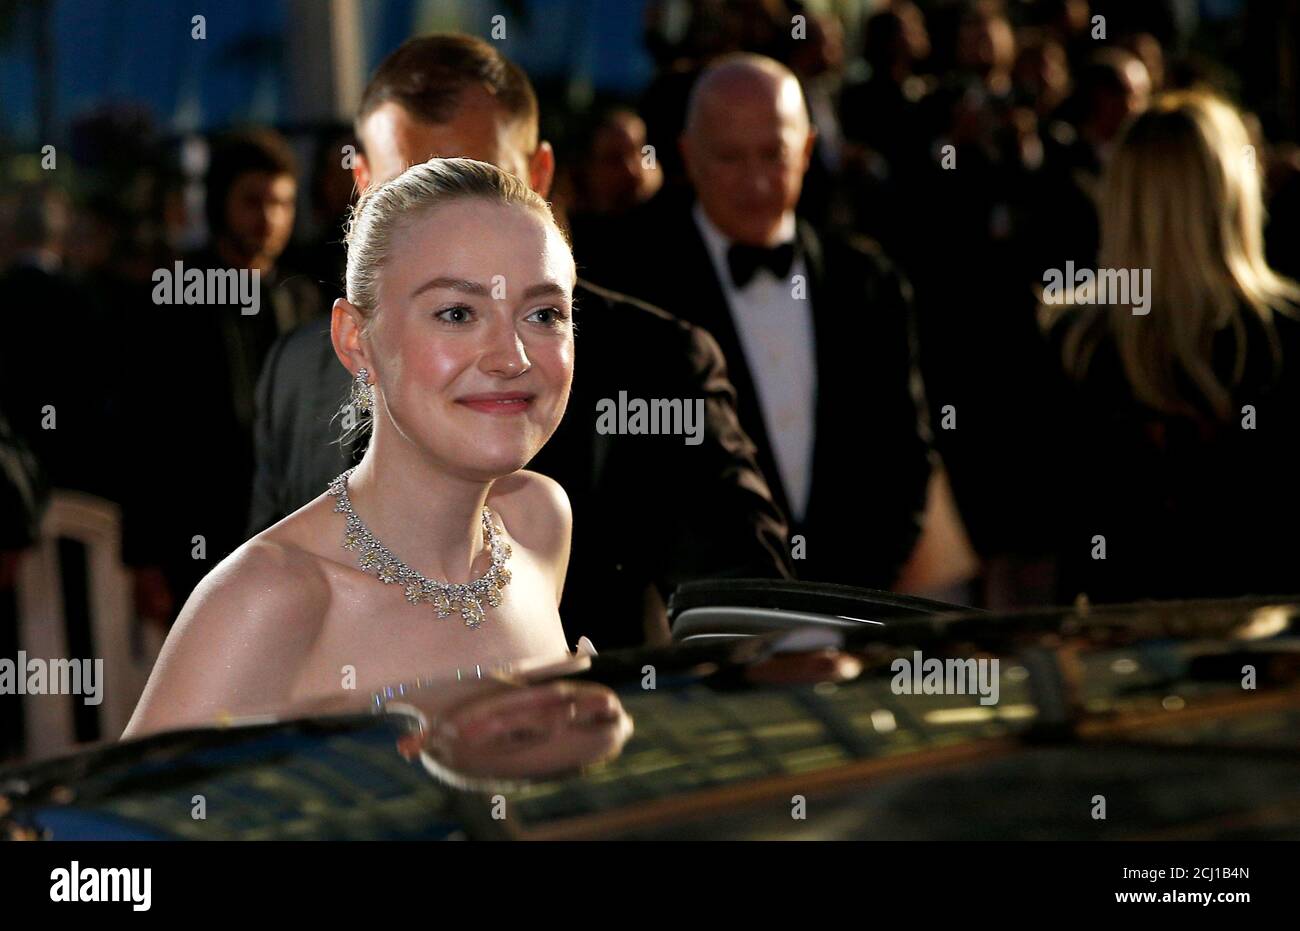 72nd Cannes Film Festival After The Screening Of The Film Once Upon A Time In Hollywood